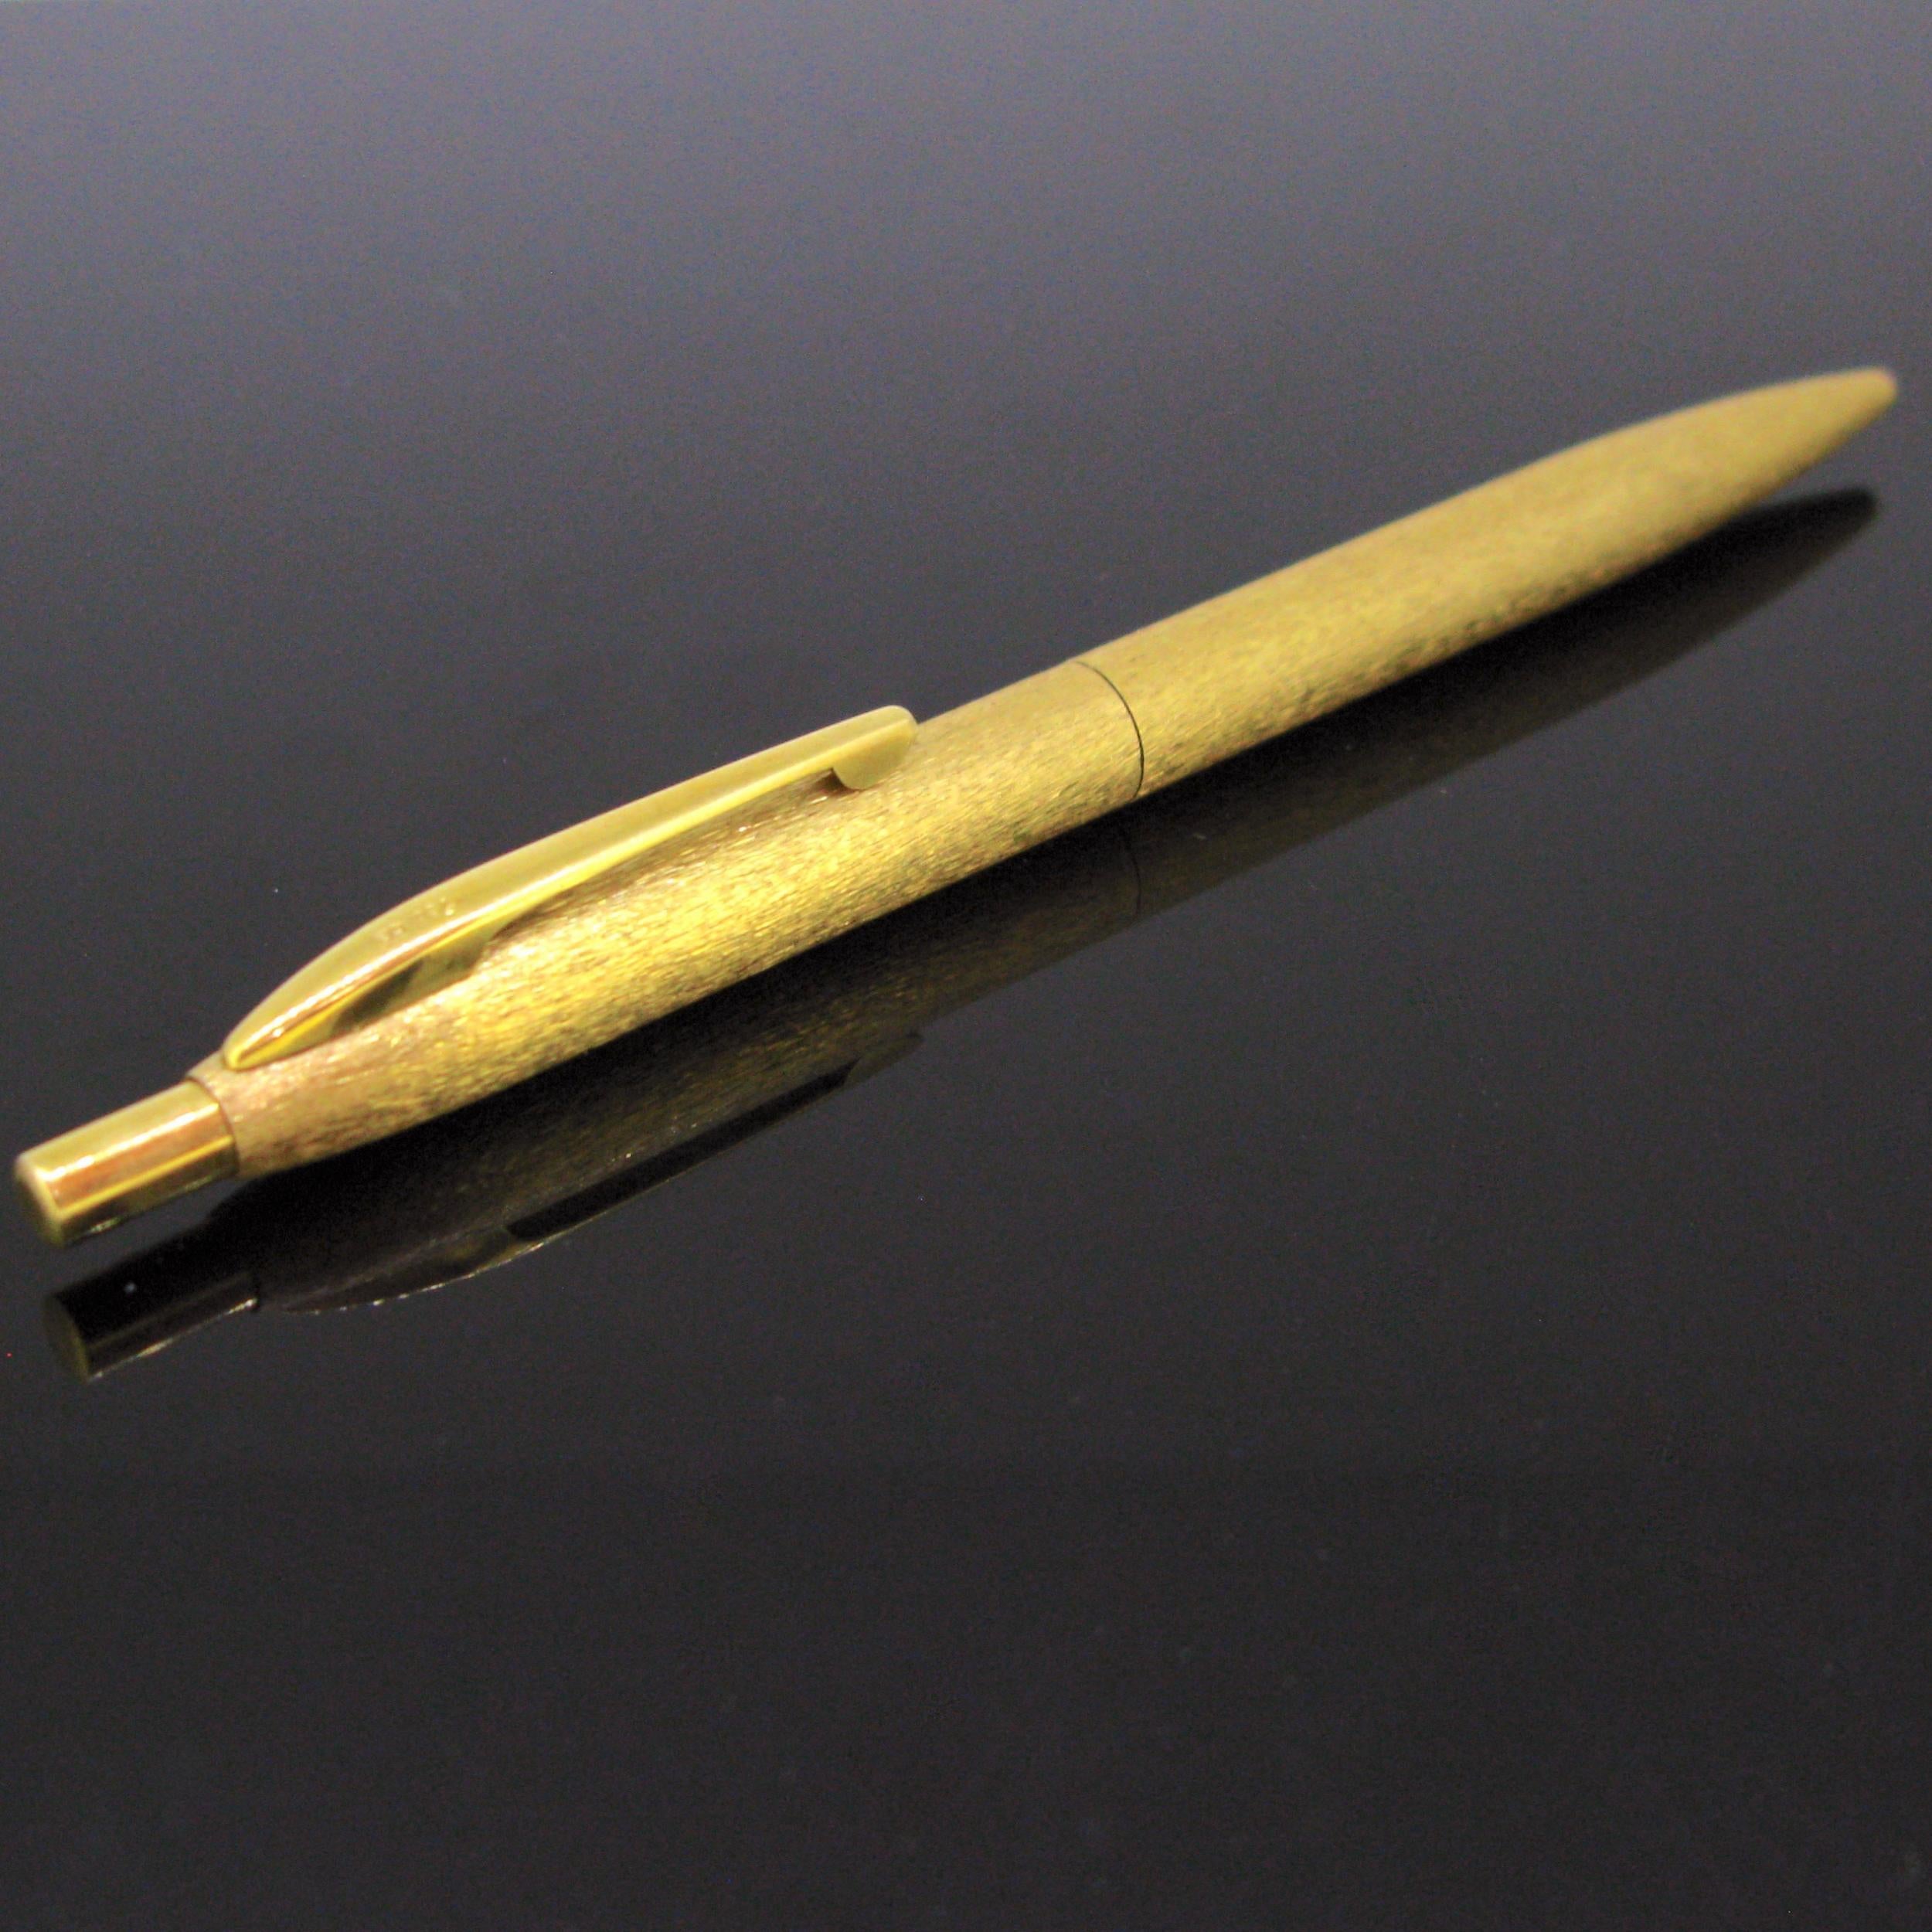 Weight:	26gr



Metal:		18kt yellow Gold



	
Condition:	Very Good



Comments:	This nice vintage ballpoint pen is made in 18kt yellow brushed gold. It is marked 750 for 18kt gold. It is in vey good vintage condition. 



Dimensions:	 Height: 12,8cm